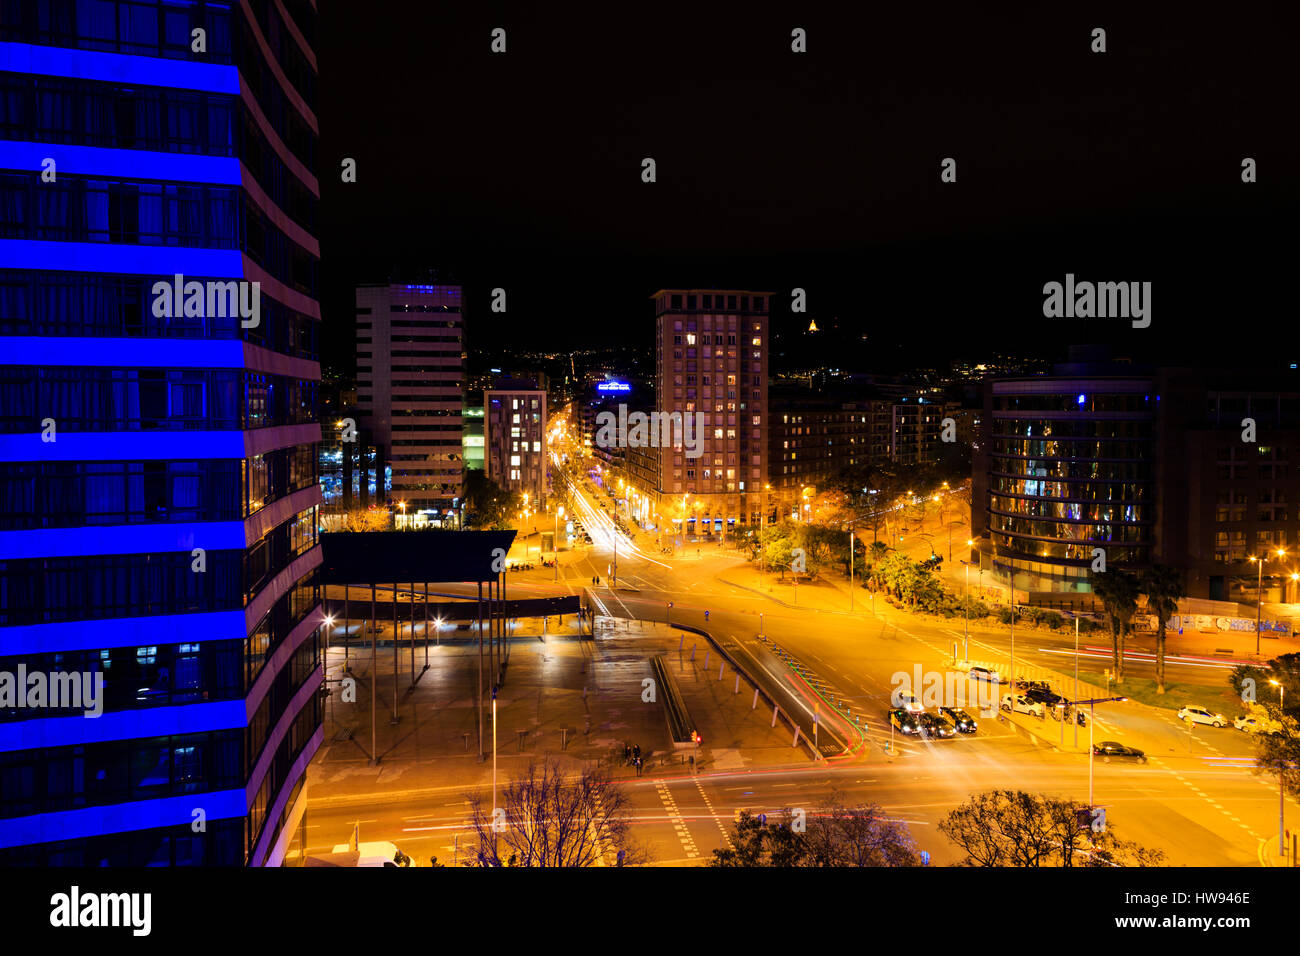 Night time view of Placa dels Paisos Catalans with traffic light trails. Barcelona, Catalunya, Spain Stock Photo